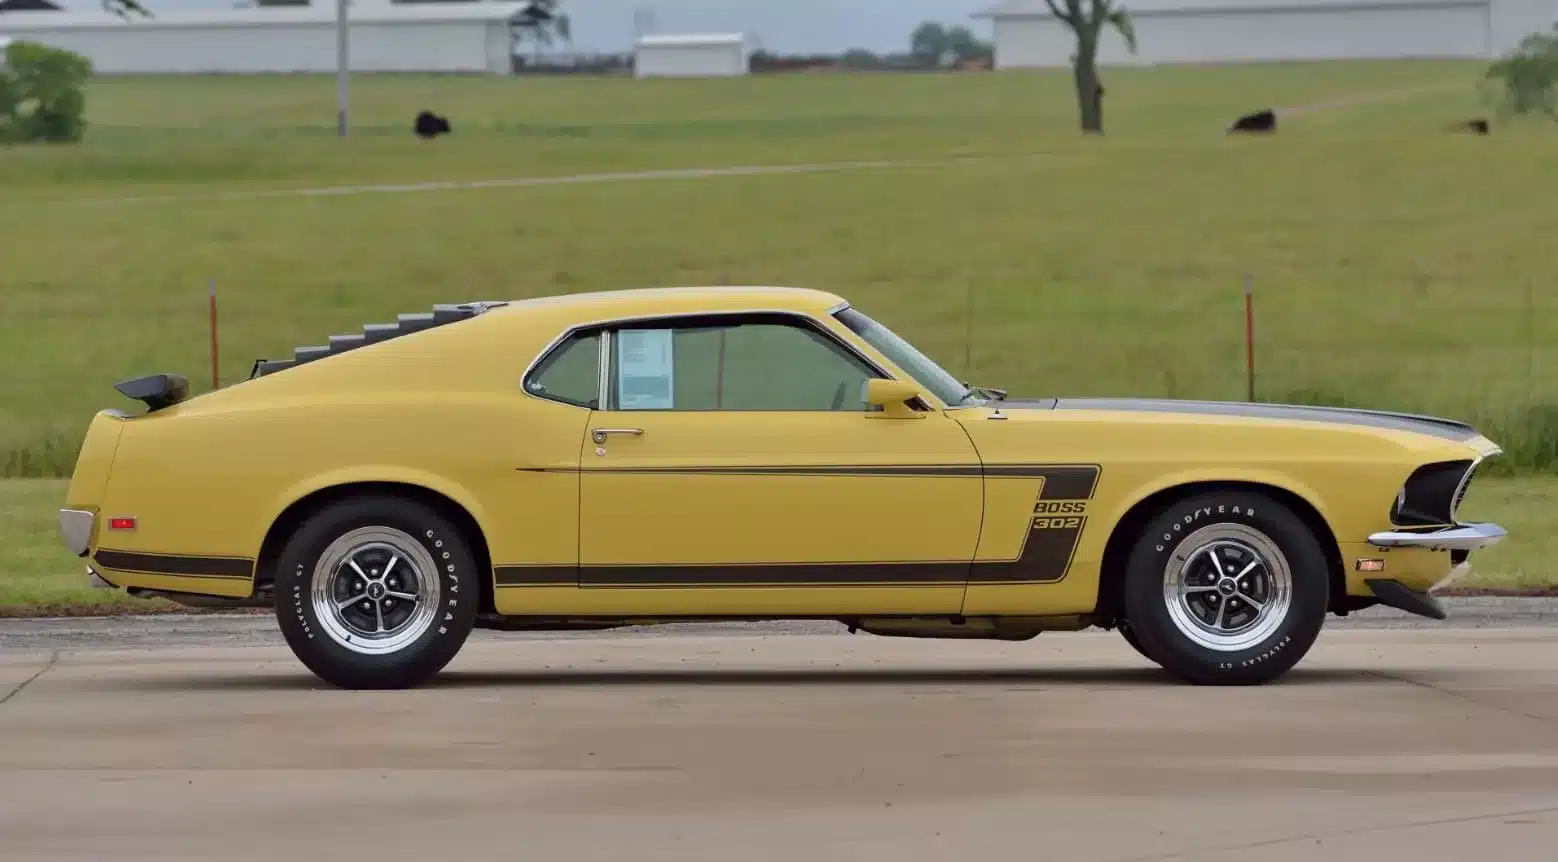 The Rare 1969 Ford Mustang Boss 302 Fastback: A Classic Beauty with All the Trimmings